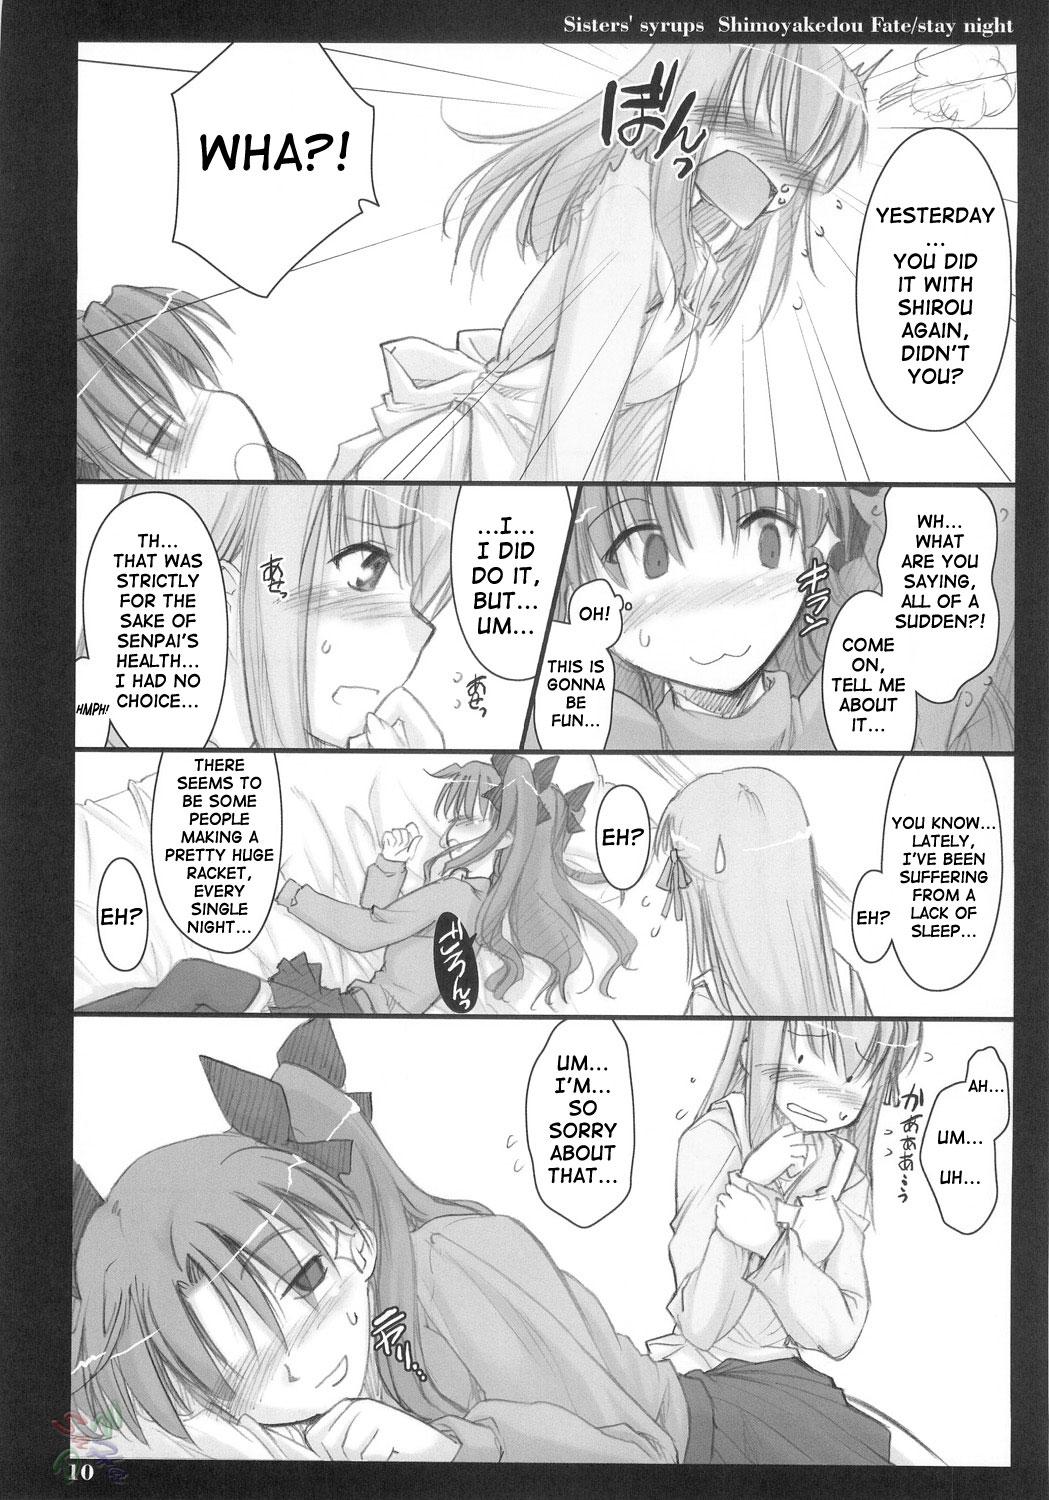 Closeup Sisters' Syrups - Fate stay night Coeds - Page 9